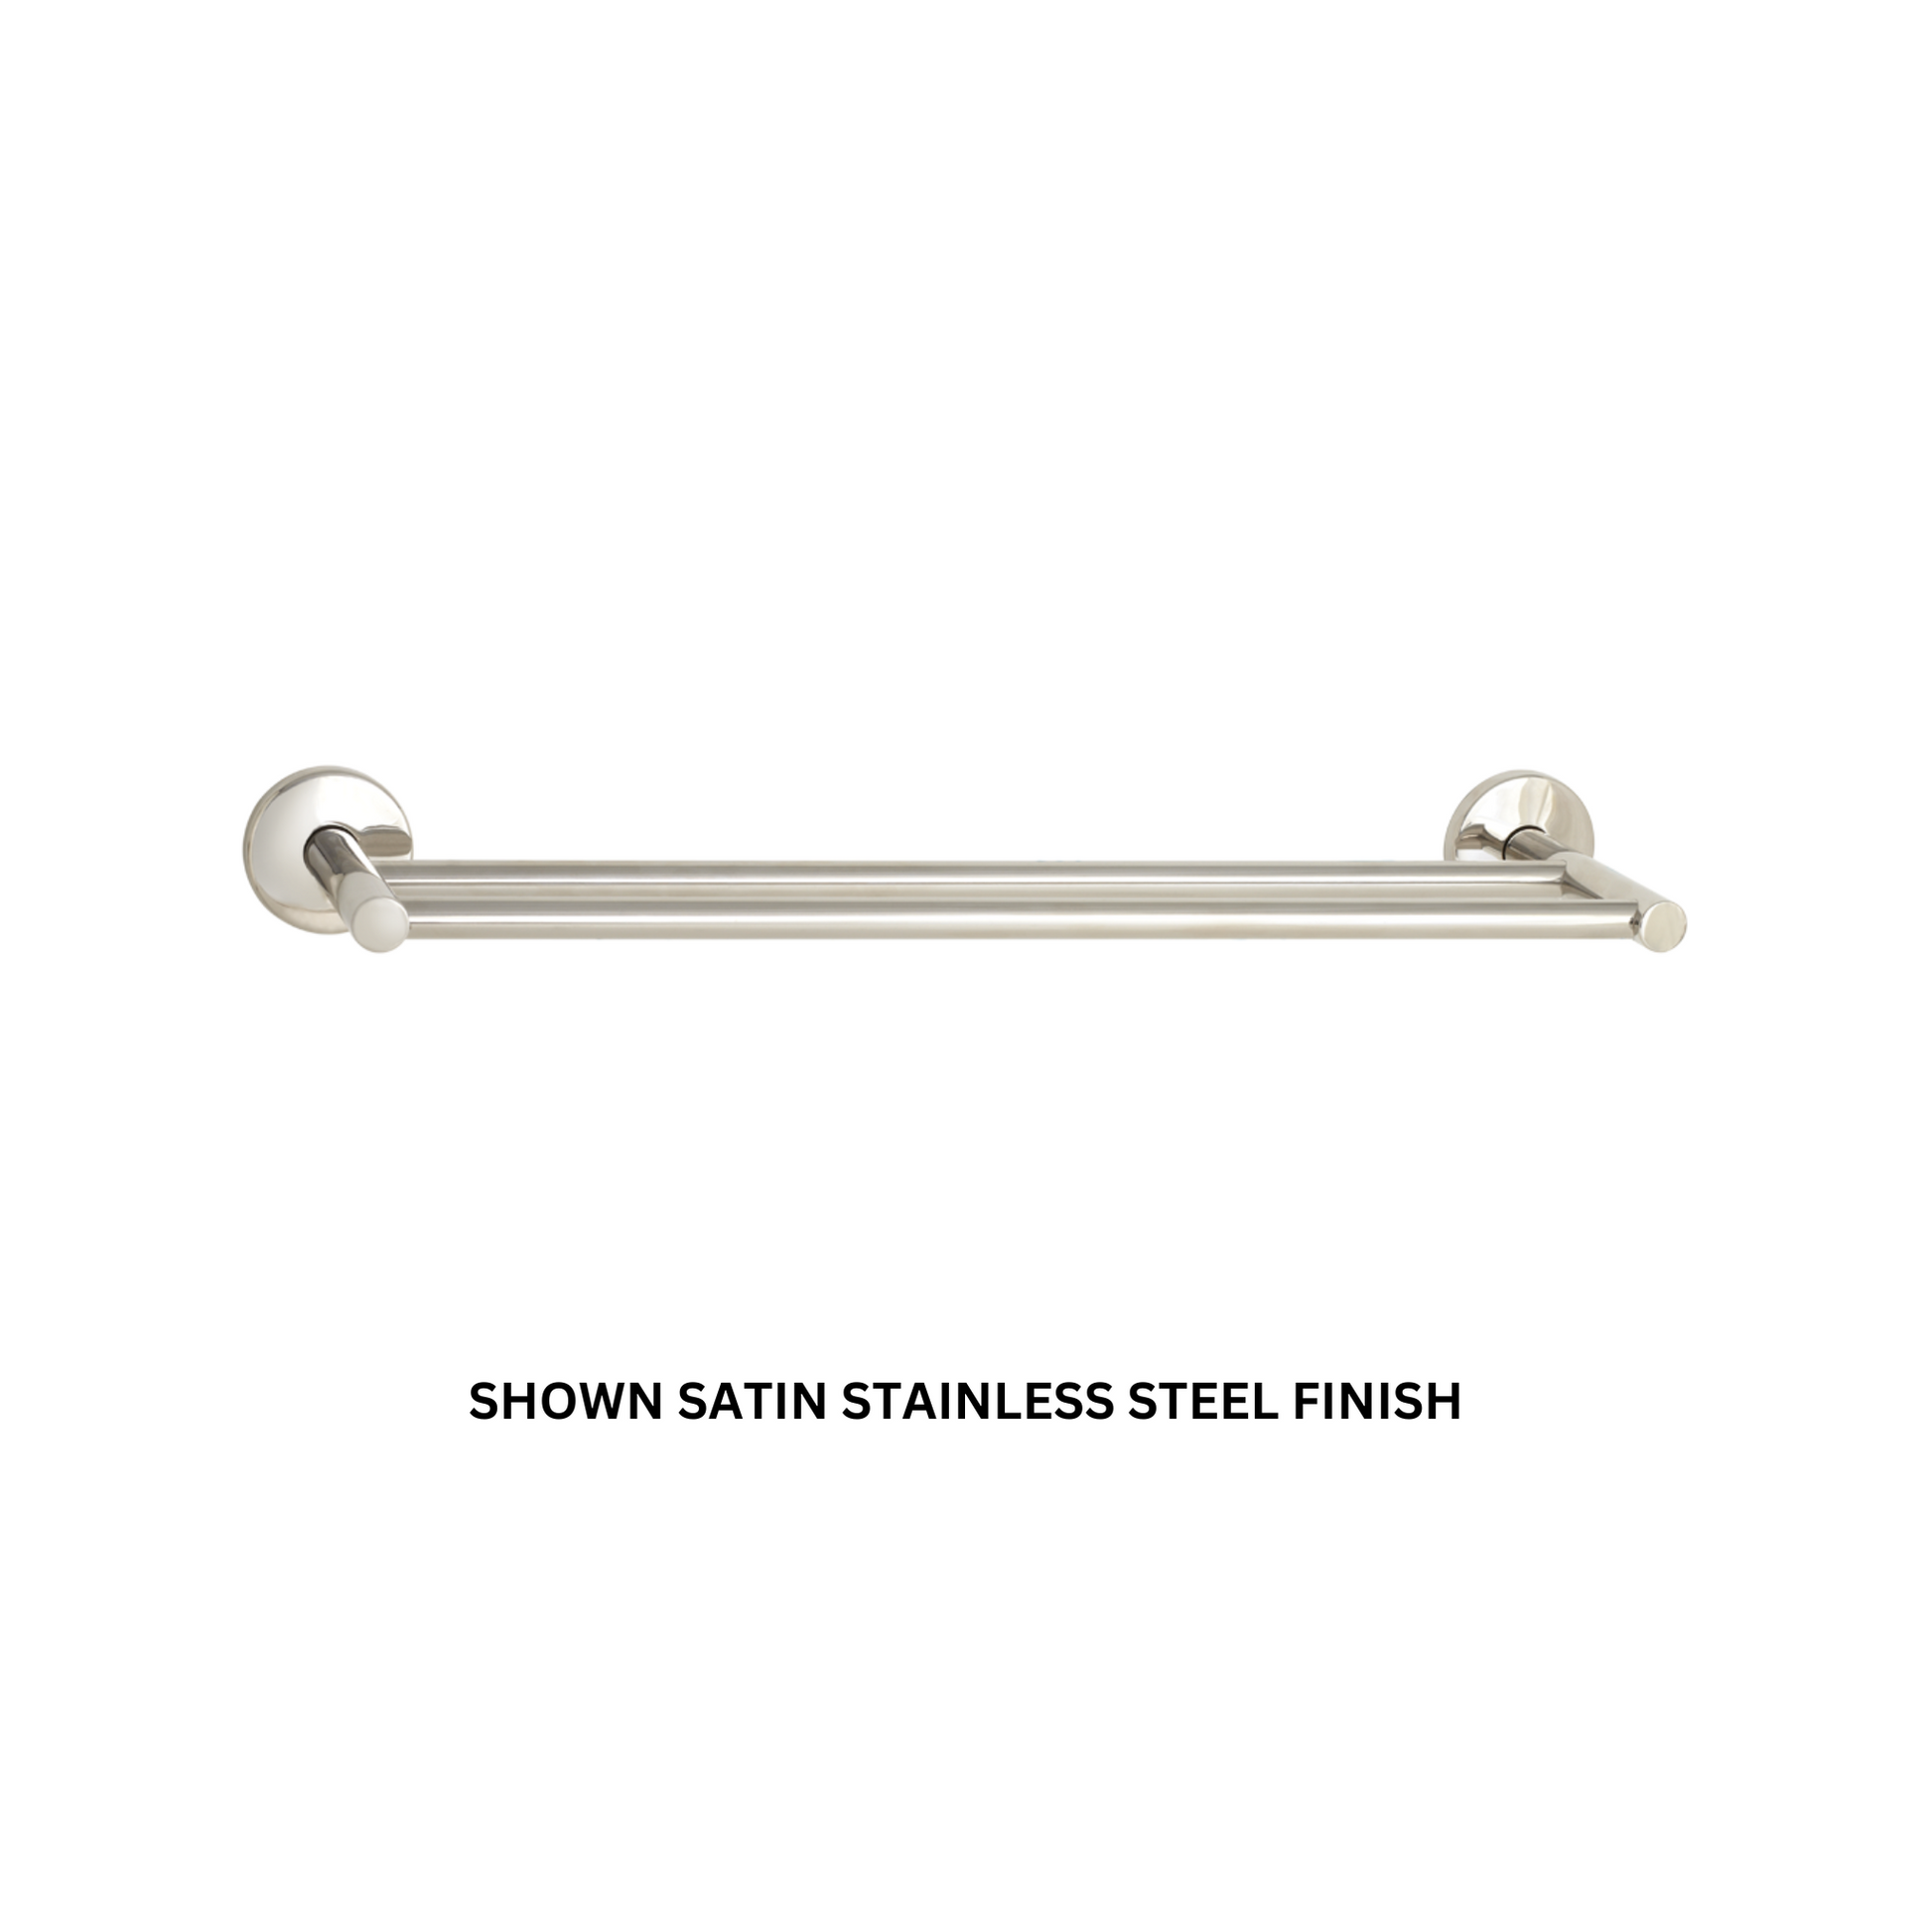 Seachrome Conorado Series 24" Biscuit Powder Coat Concealed Mounting Flange Double Towel Bar